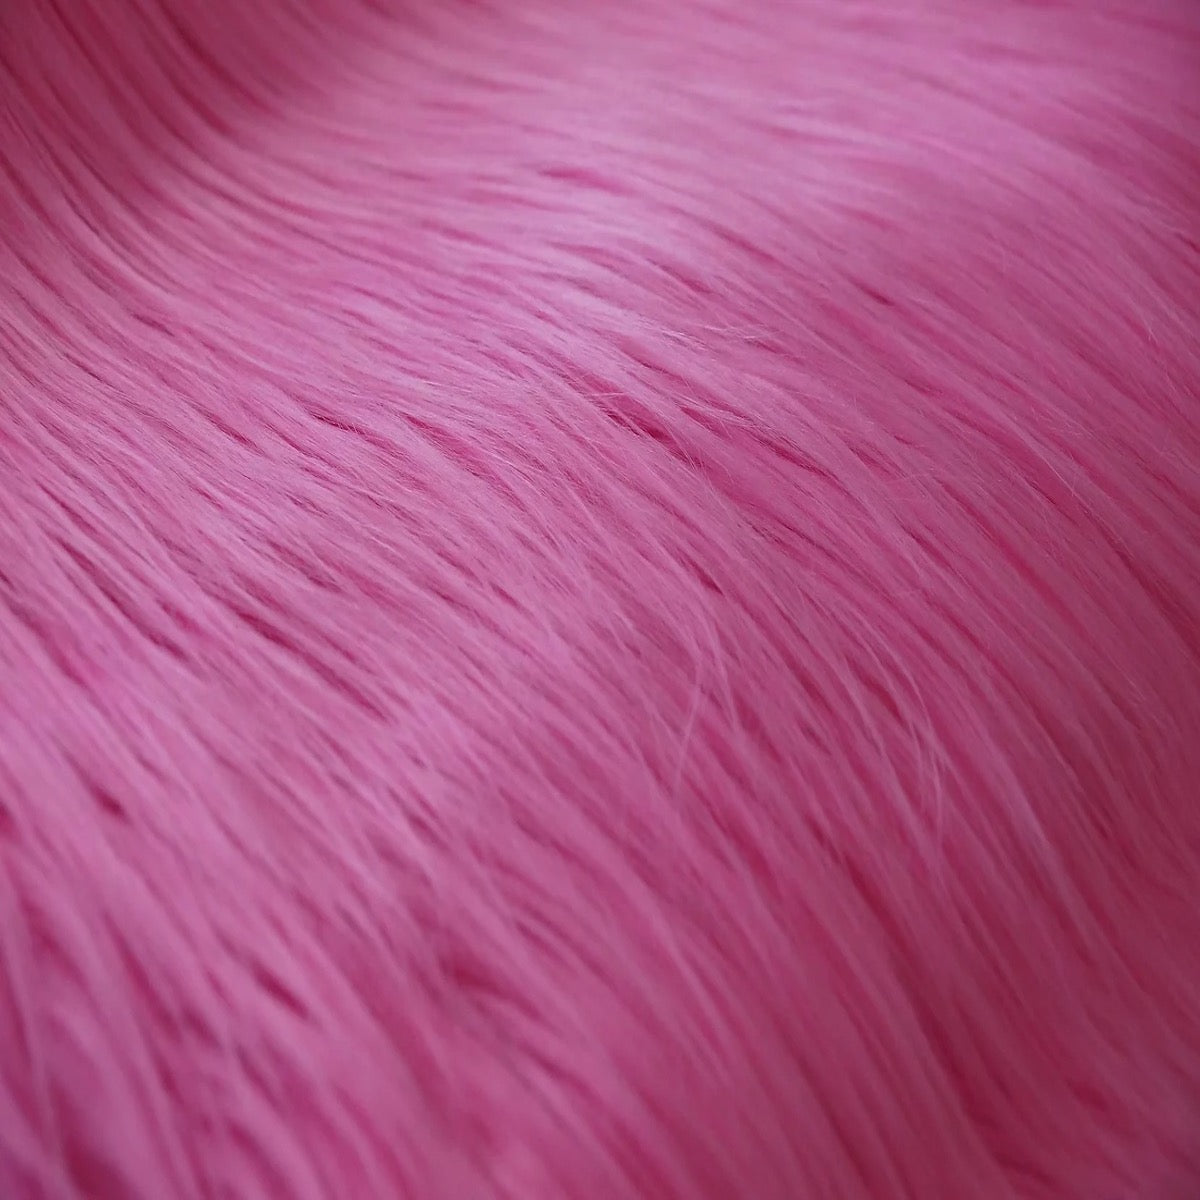 Rose Pink Faux Fur Fabric - Luxury Faux Fur - Fabric Online